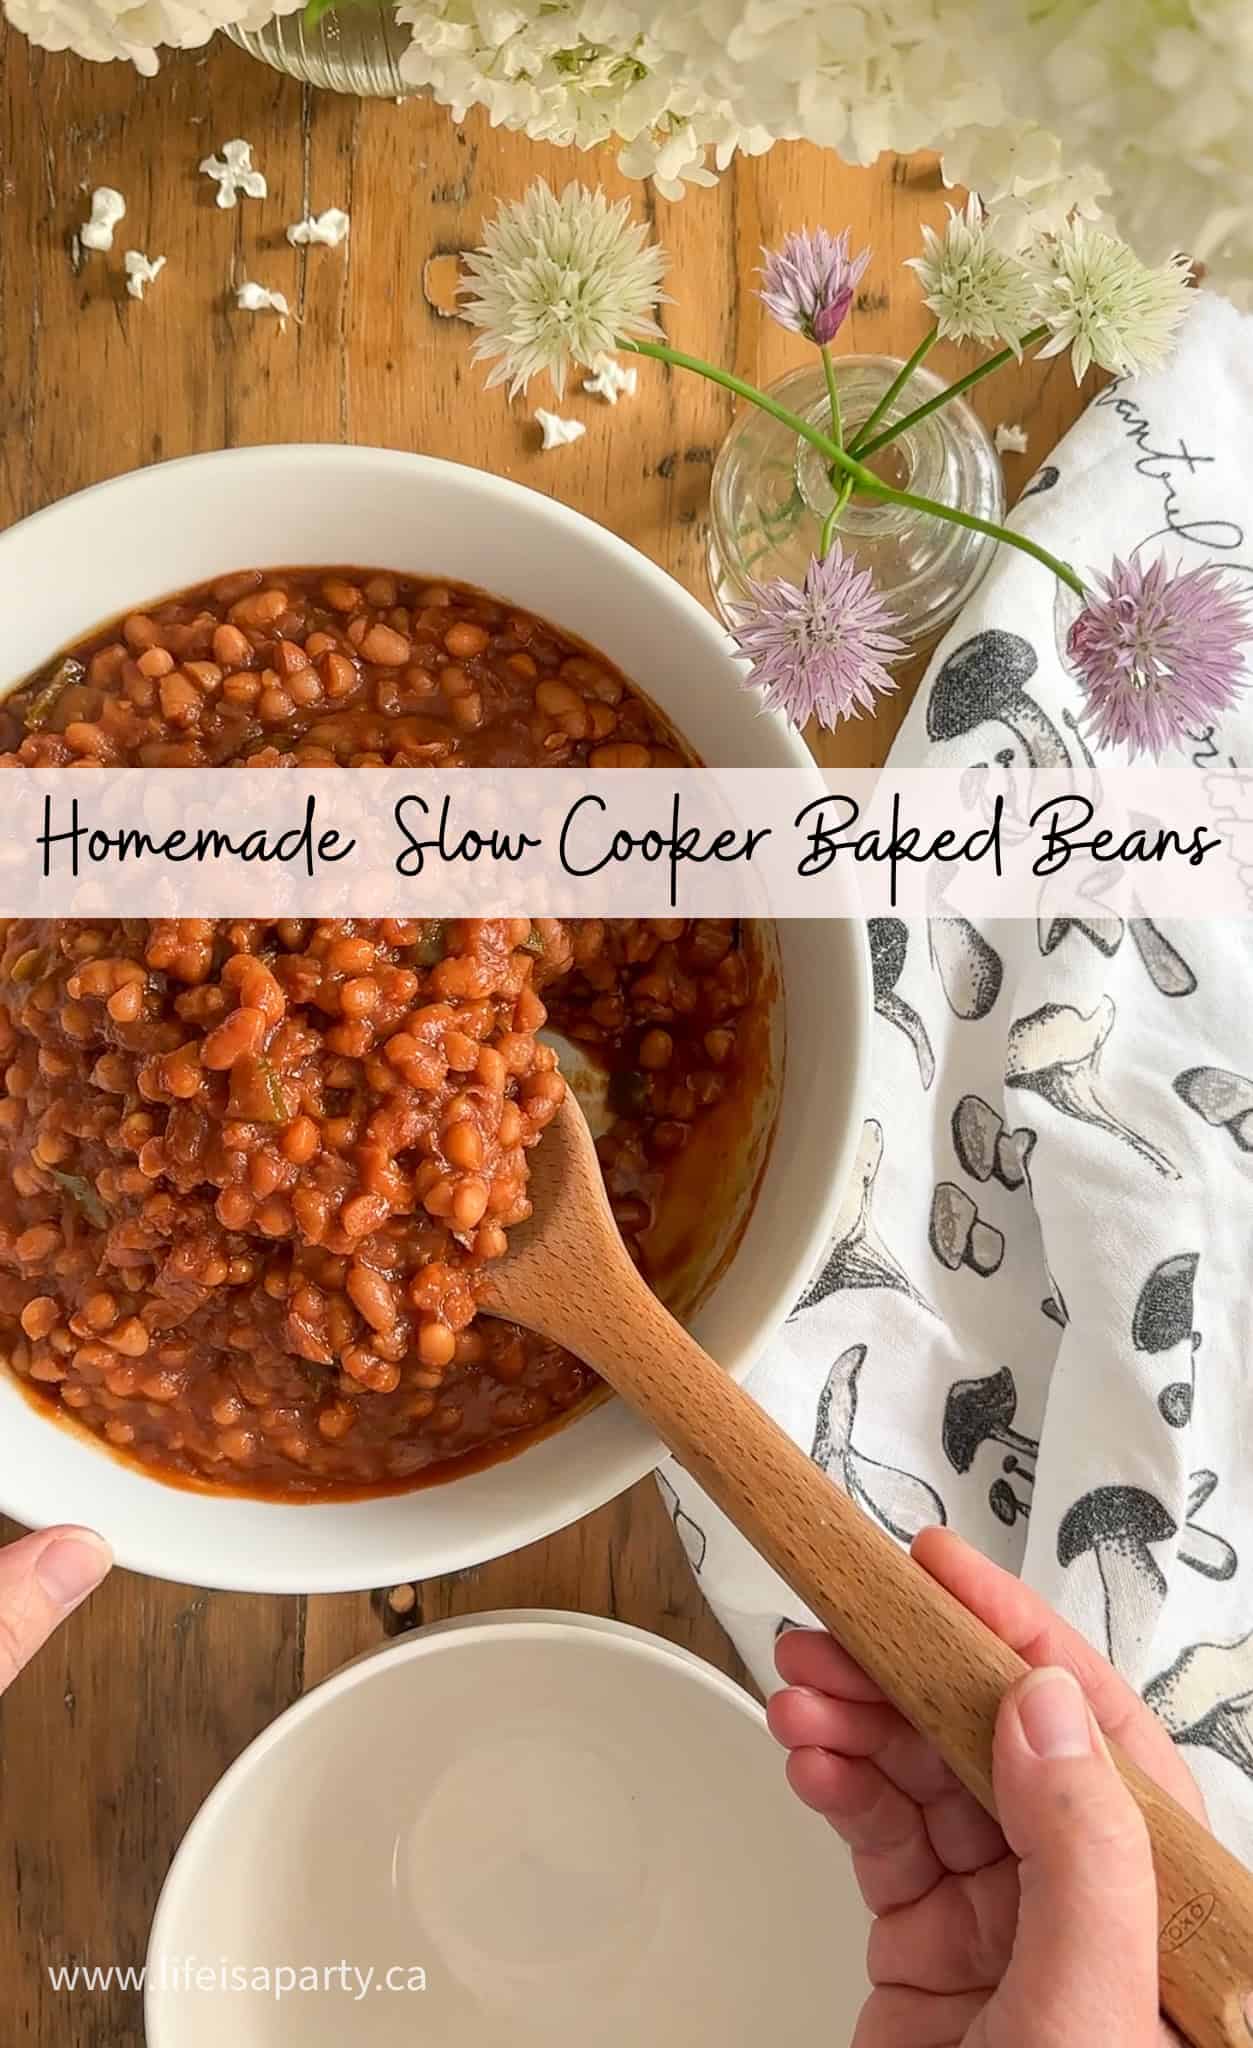 Slow Cooker Baked Beans Recipe: once you've tried homemade baked beans you'll never want to go back to the canned version again.